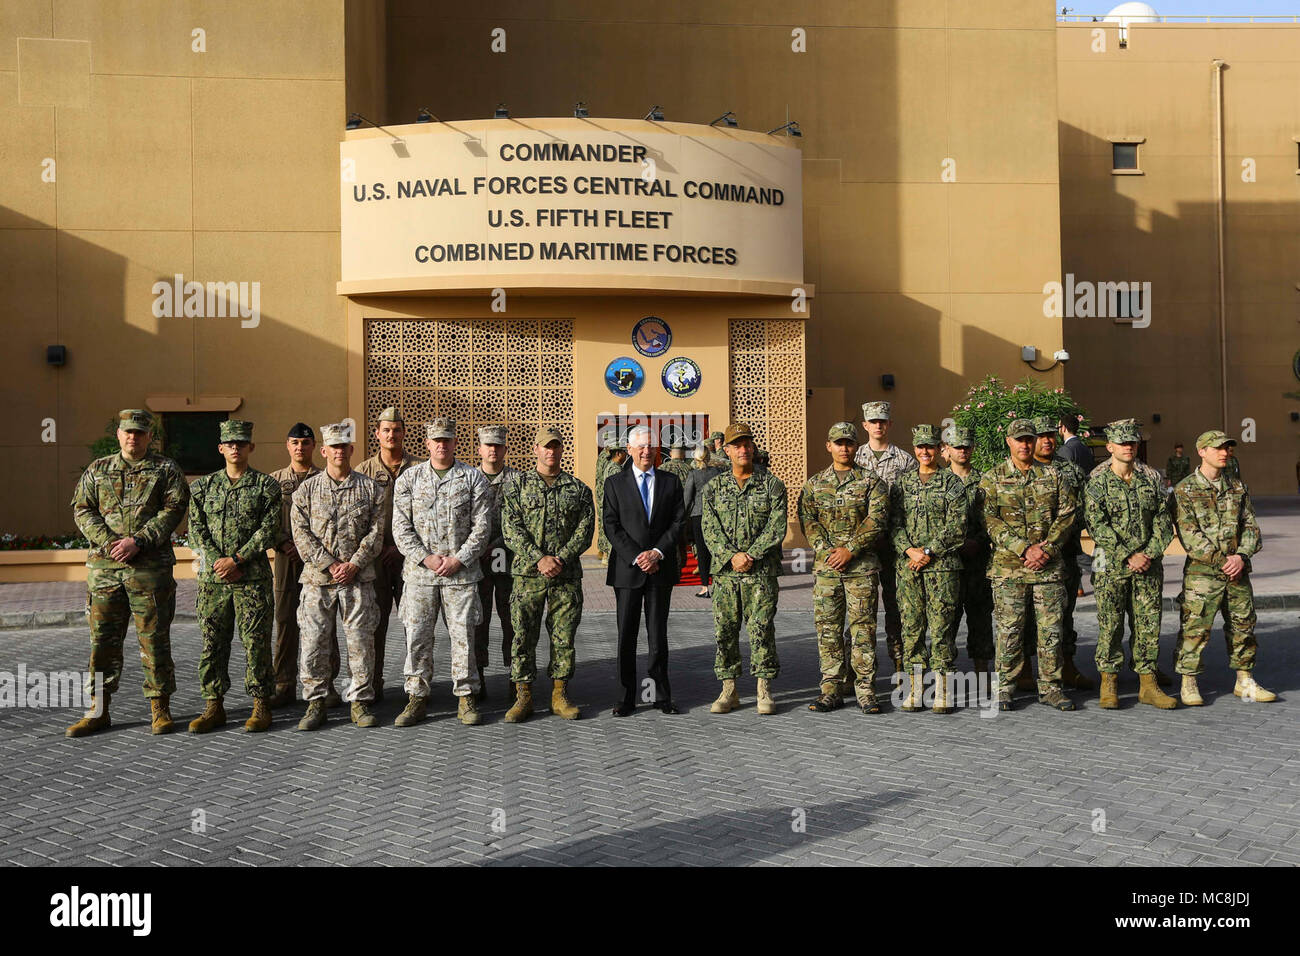 ***NEED VIRIN*** U.S. 5TH FLEET AREA OF OPERATIONS (March 15, 2018) Naval Amphibious Force, Task Force 51/5th Marine Expeditionary Brigade Sailors and Marines, along with U.S. Army and Coast Guard service members, meet with U.S. Secretary of Defense James Mattis before attending a town hall meeting at Naval Support Activity Bahrain. During the meeting, the Secretary of Defense spoke about the current defense posture in the U.S. Central Command area of responsibility and accepted questions from staff. Stock Photo